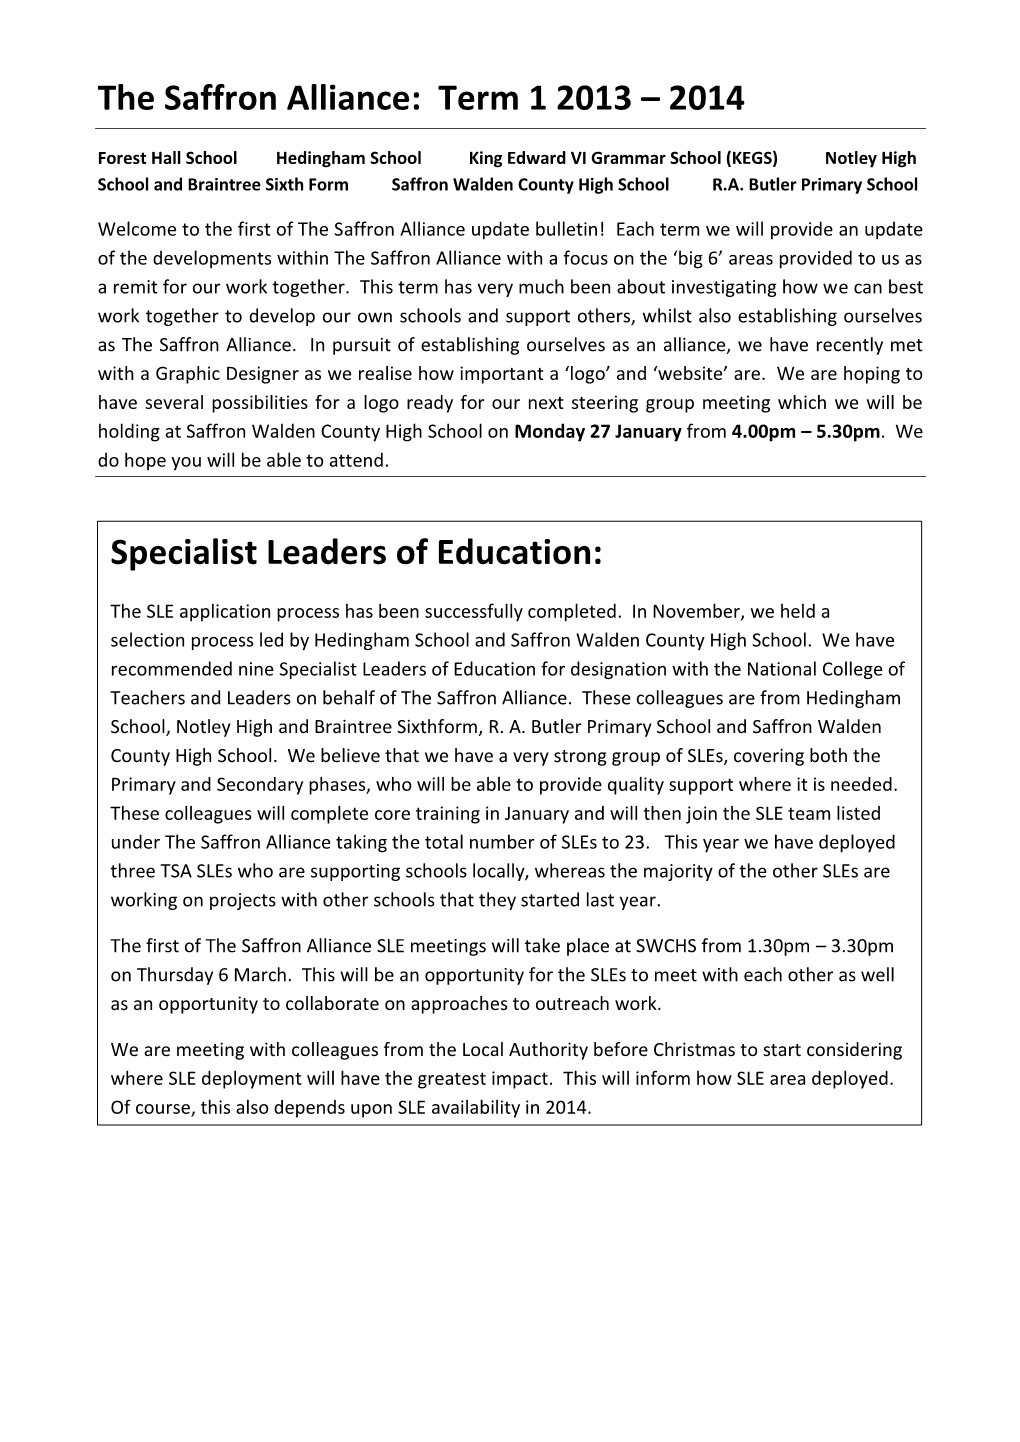 Term 1 2013 – 2014 Specialist Leaders of Education